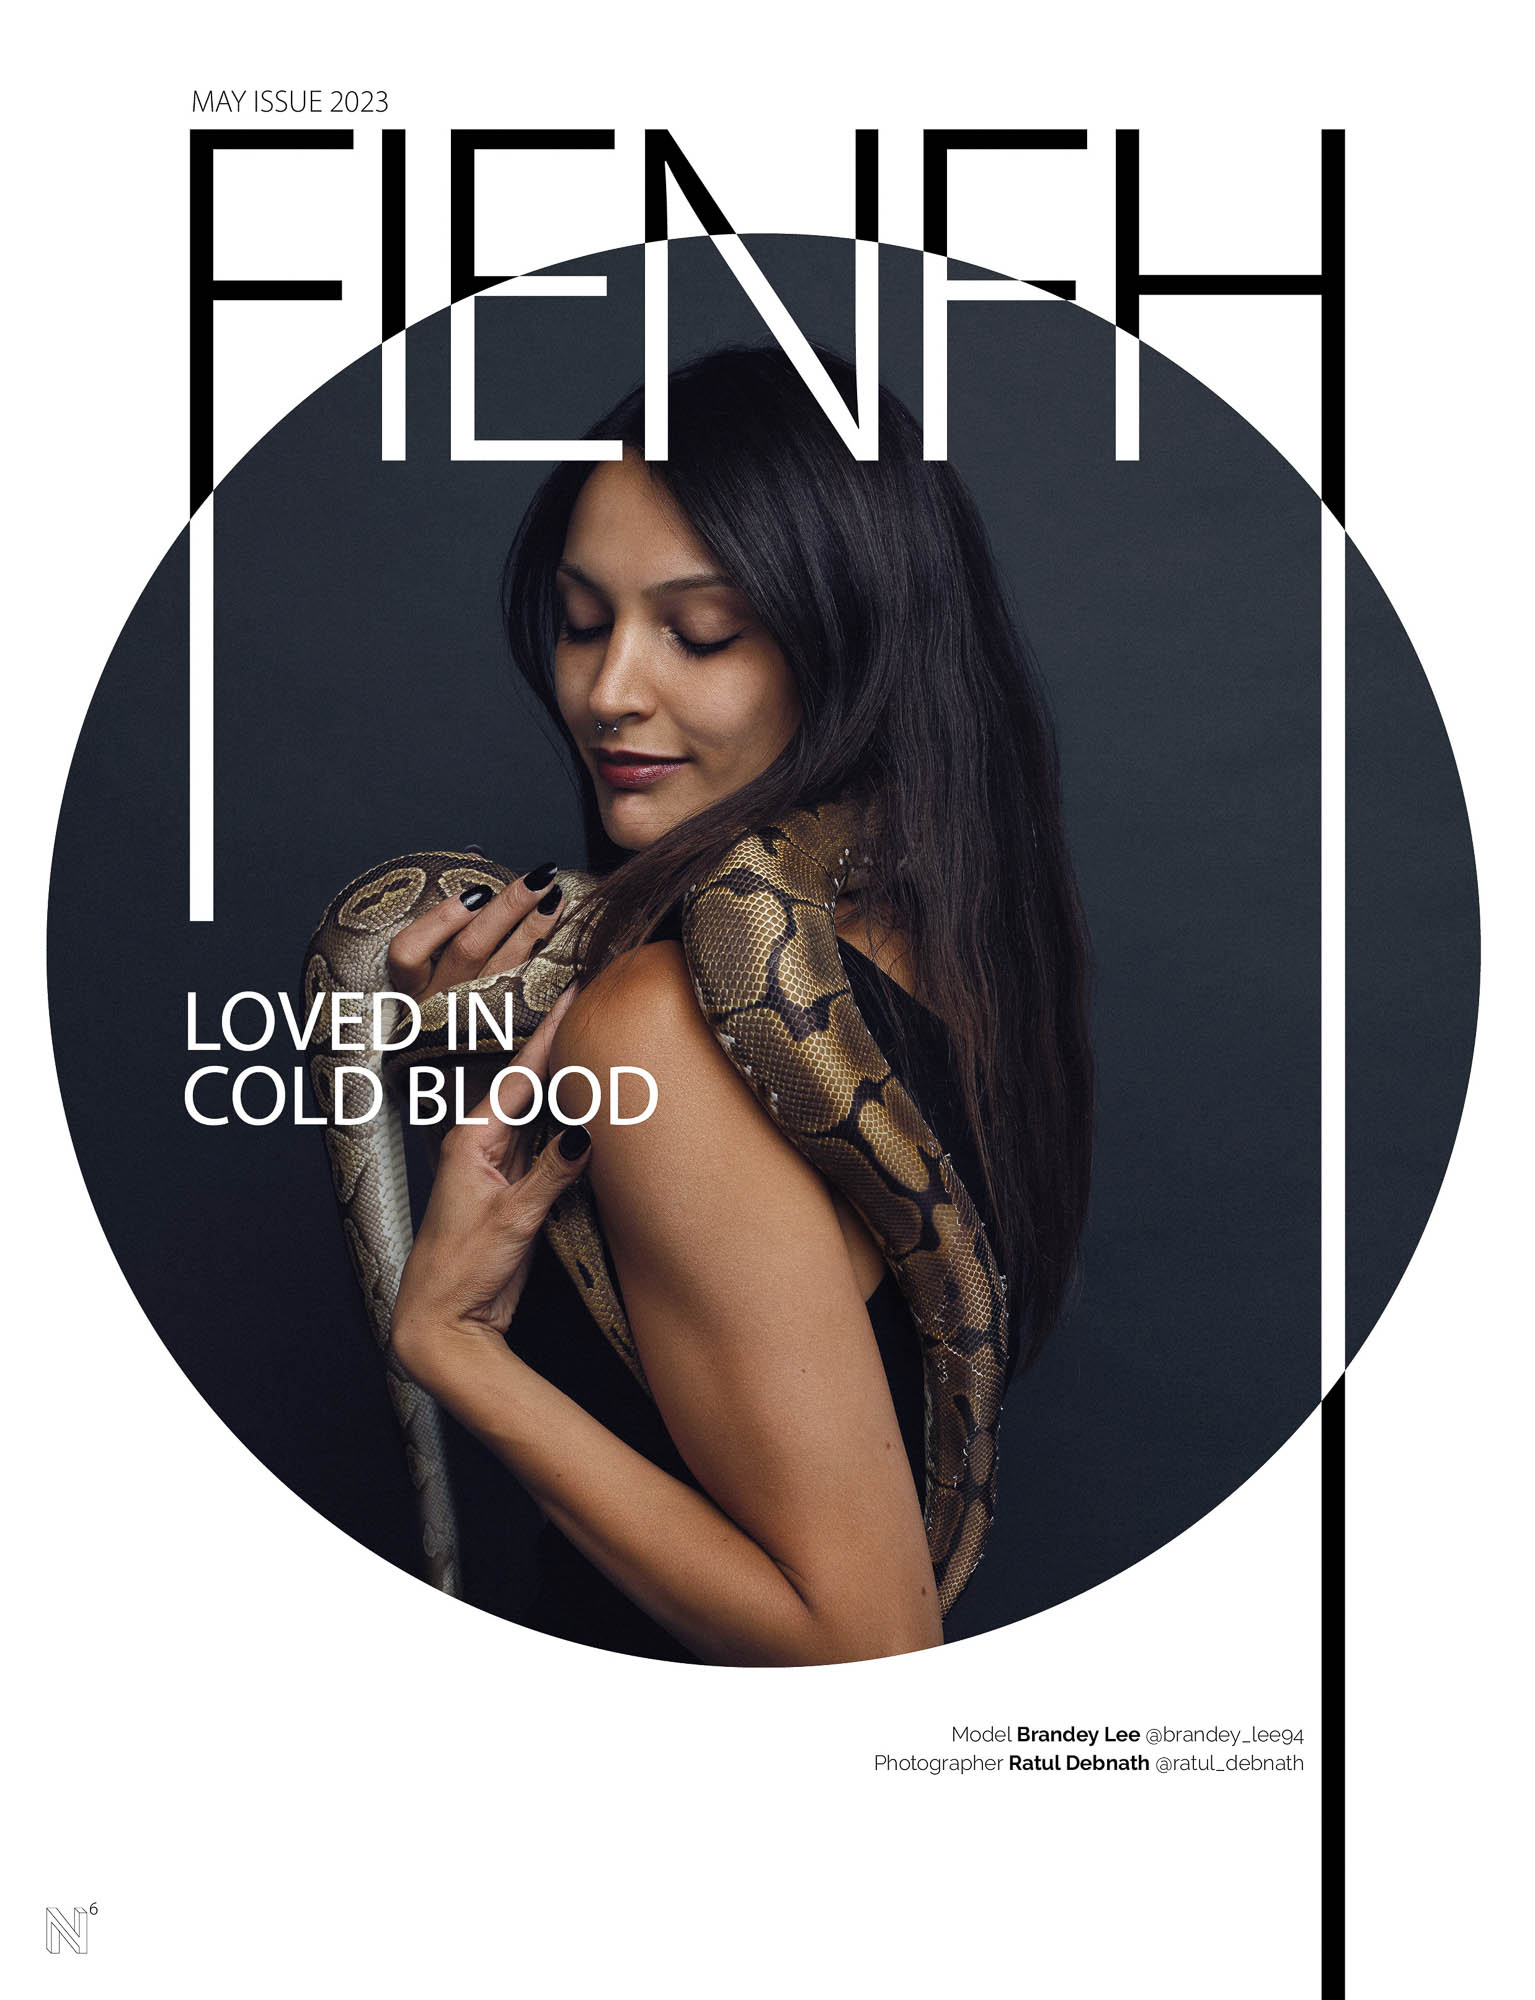 A Fienfh Magazine May Issue 20236